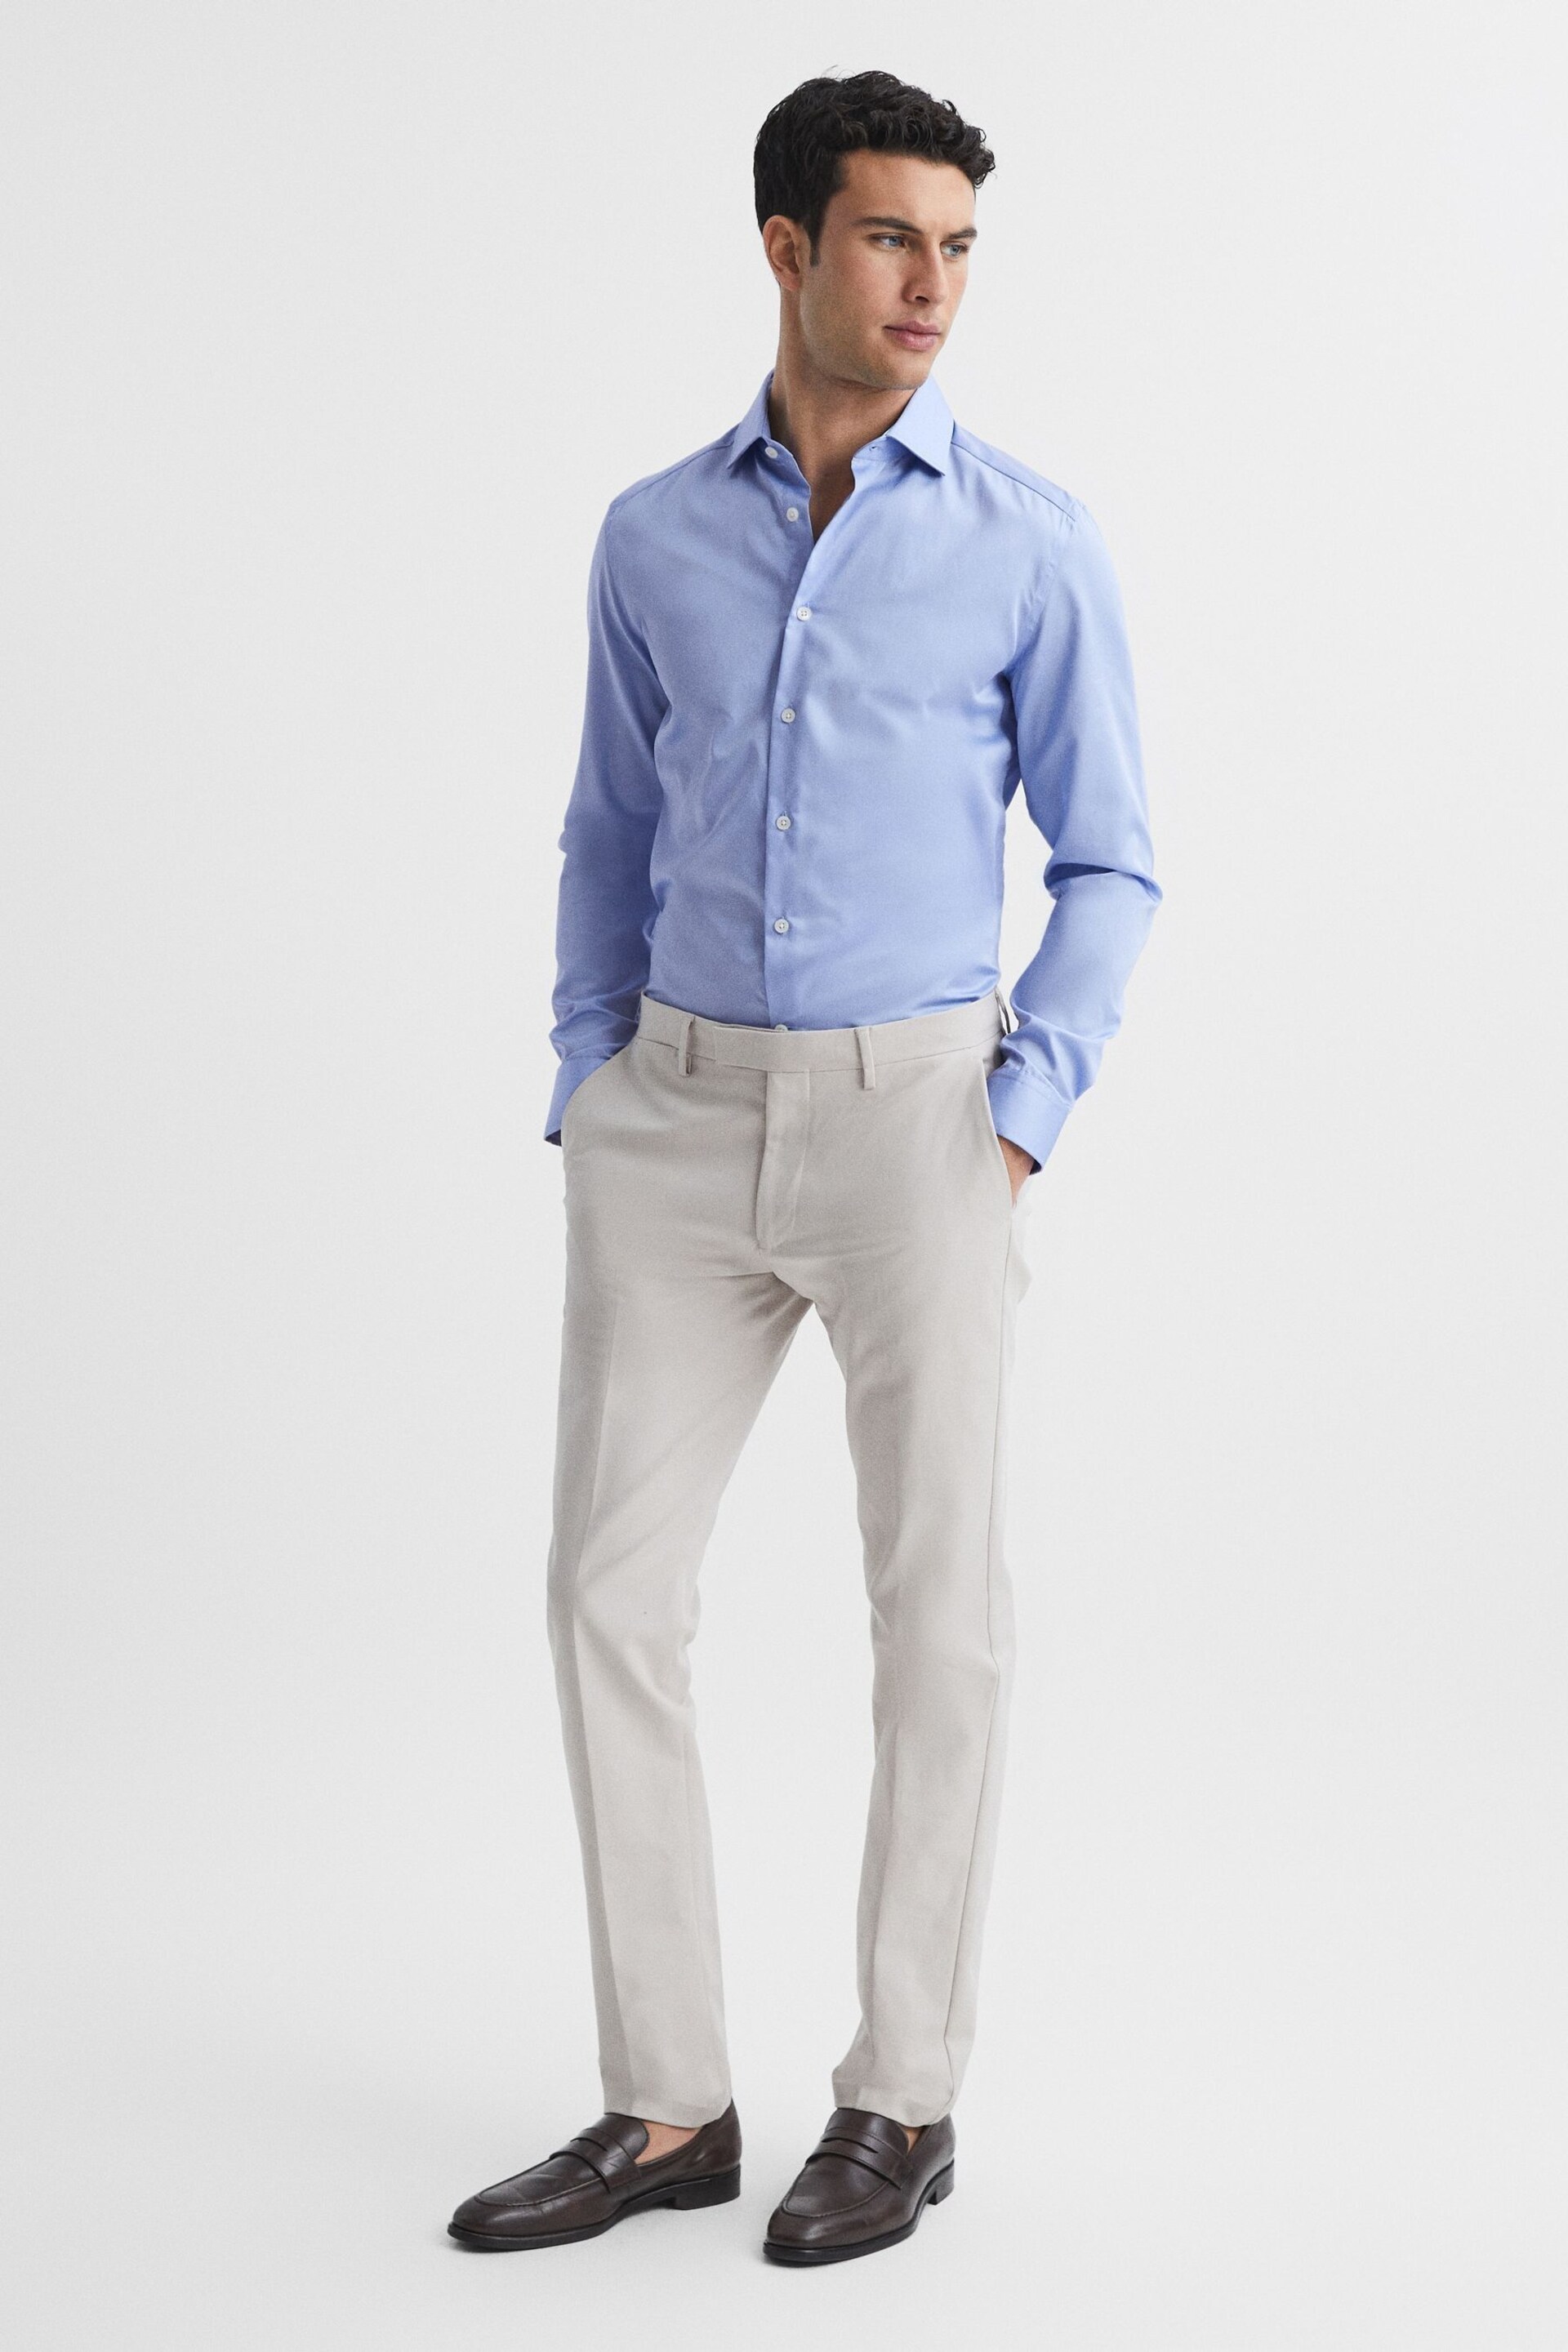 Reiss Mid Blue Remote Cotton Satin Slim Fit Shirt - Image 3 of 6